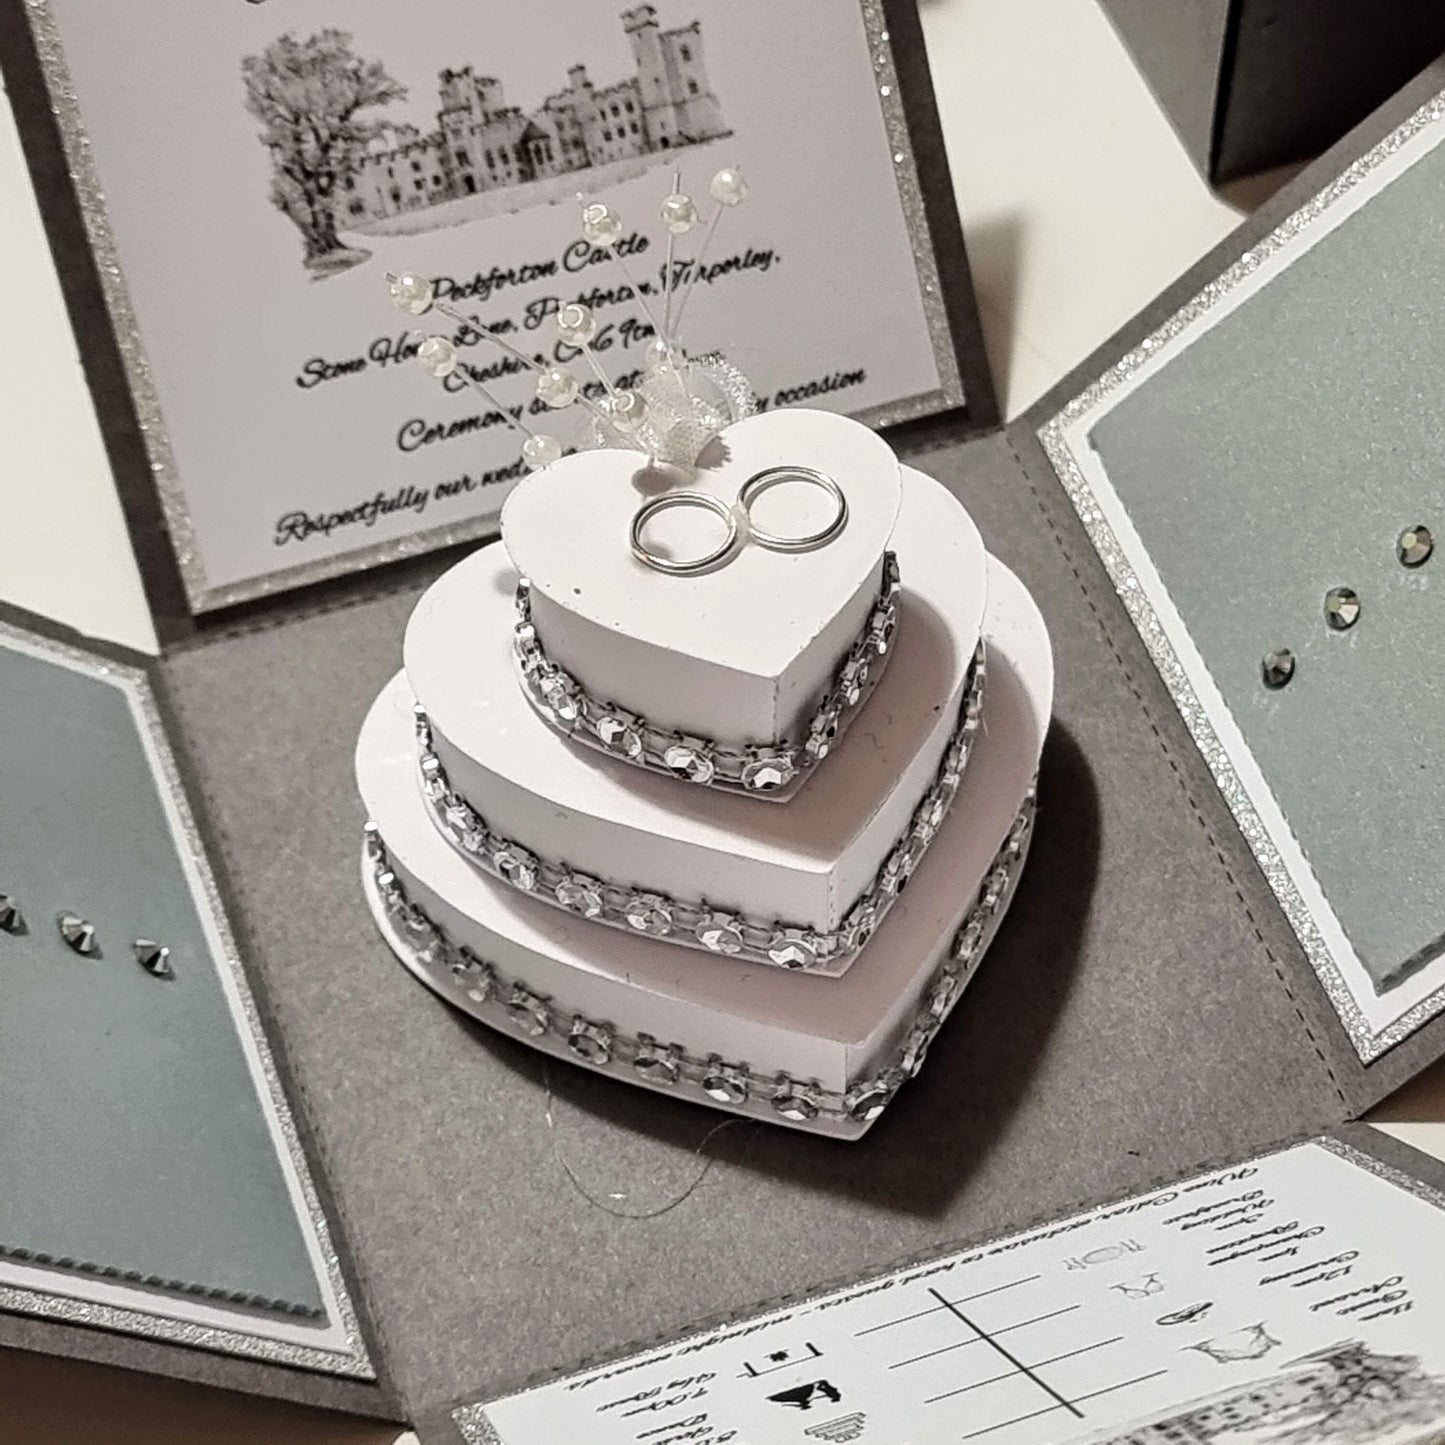 Wedding cake decorated with diamonds, colour-coordinated flowers &; a pair of wedding rings.